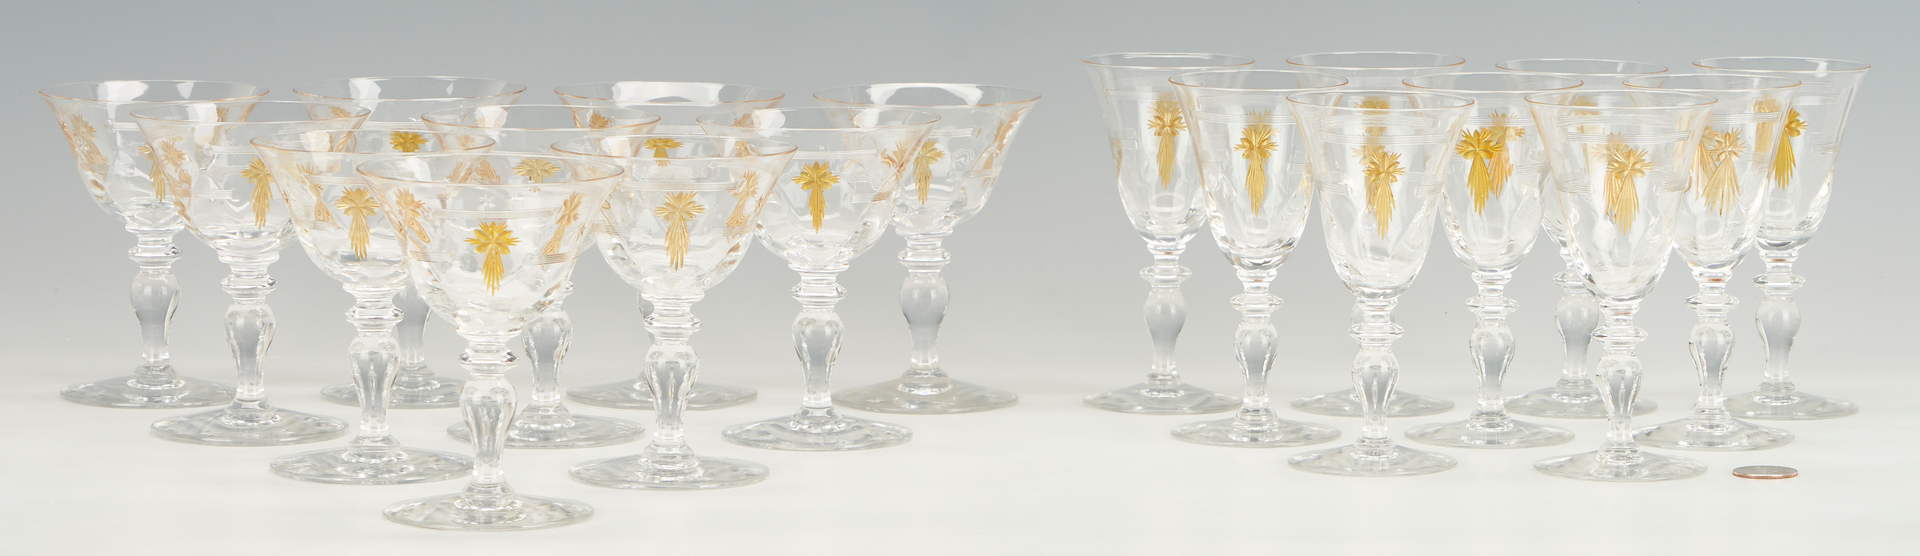 Lot 967: 69 Signed Hawkes Amber Star Glass Stemware Pieces